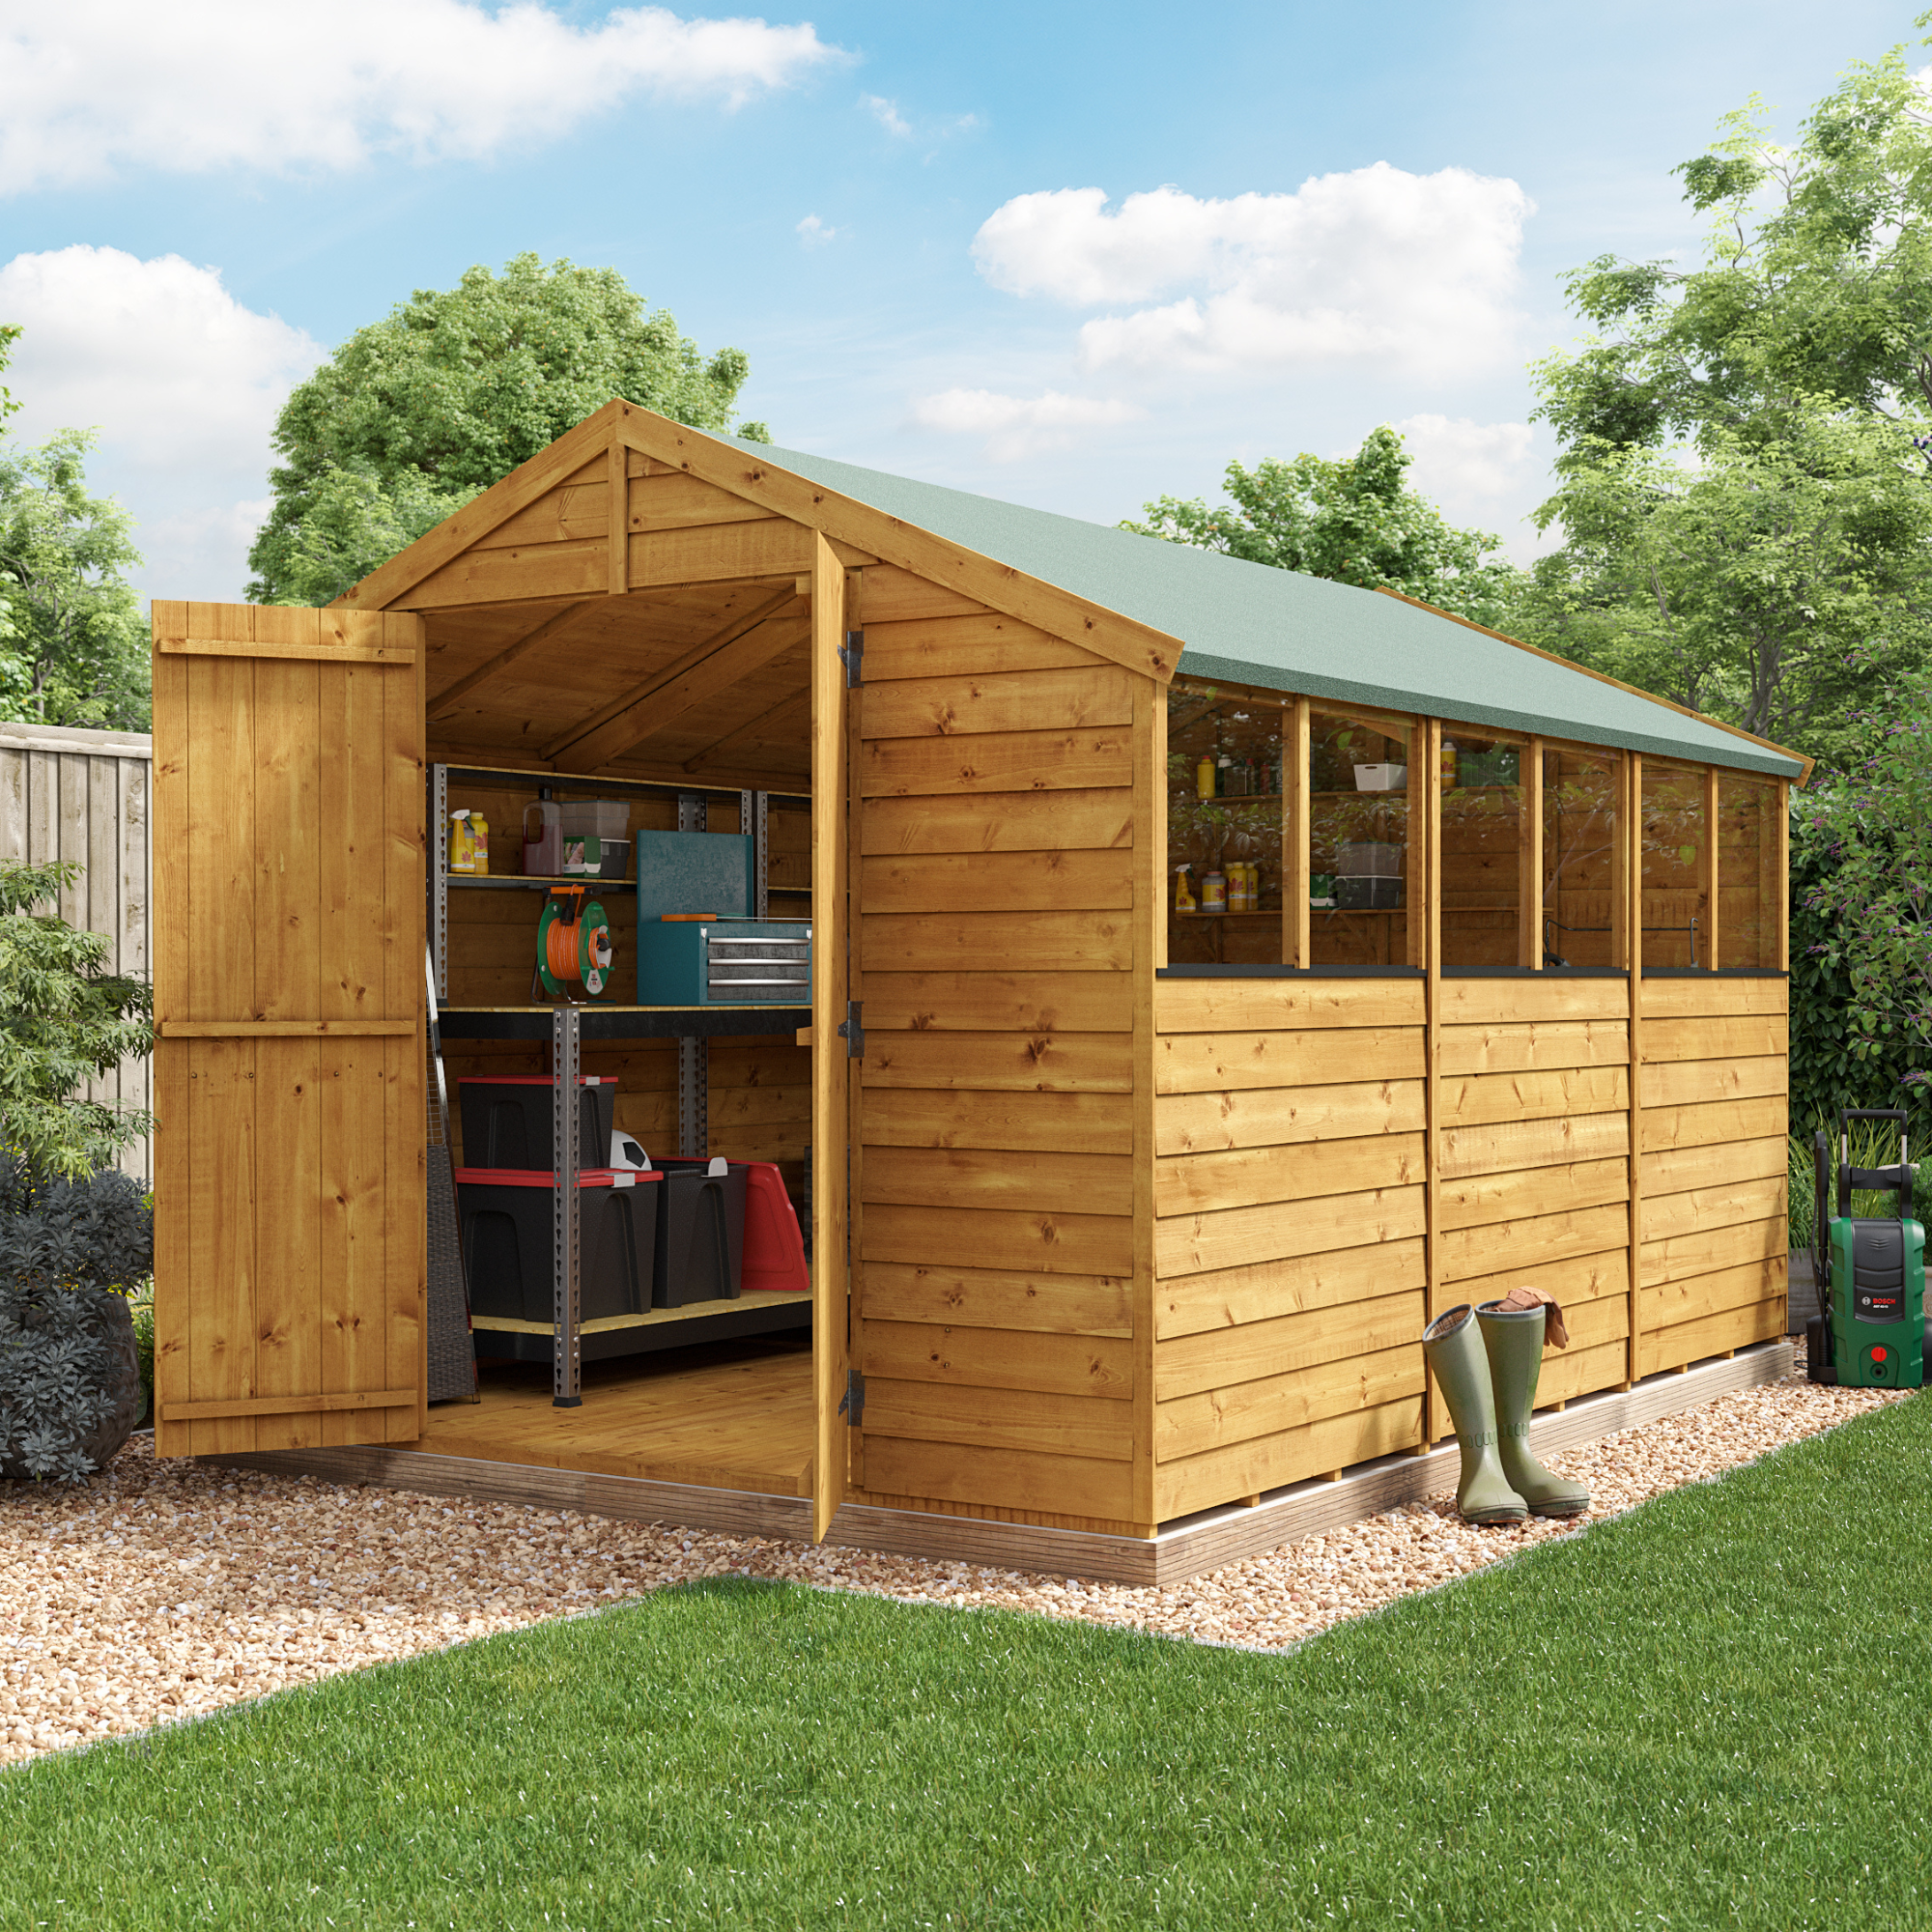 12 x 8 Shed - BillyOh Keeper Overlap Apex Wooden Shed - Windowed 12x8 Garden Shed